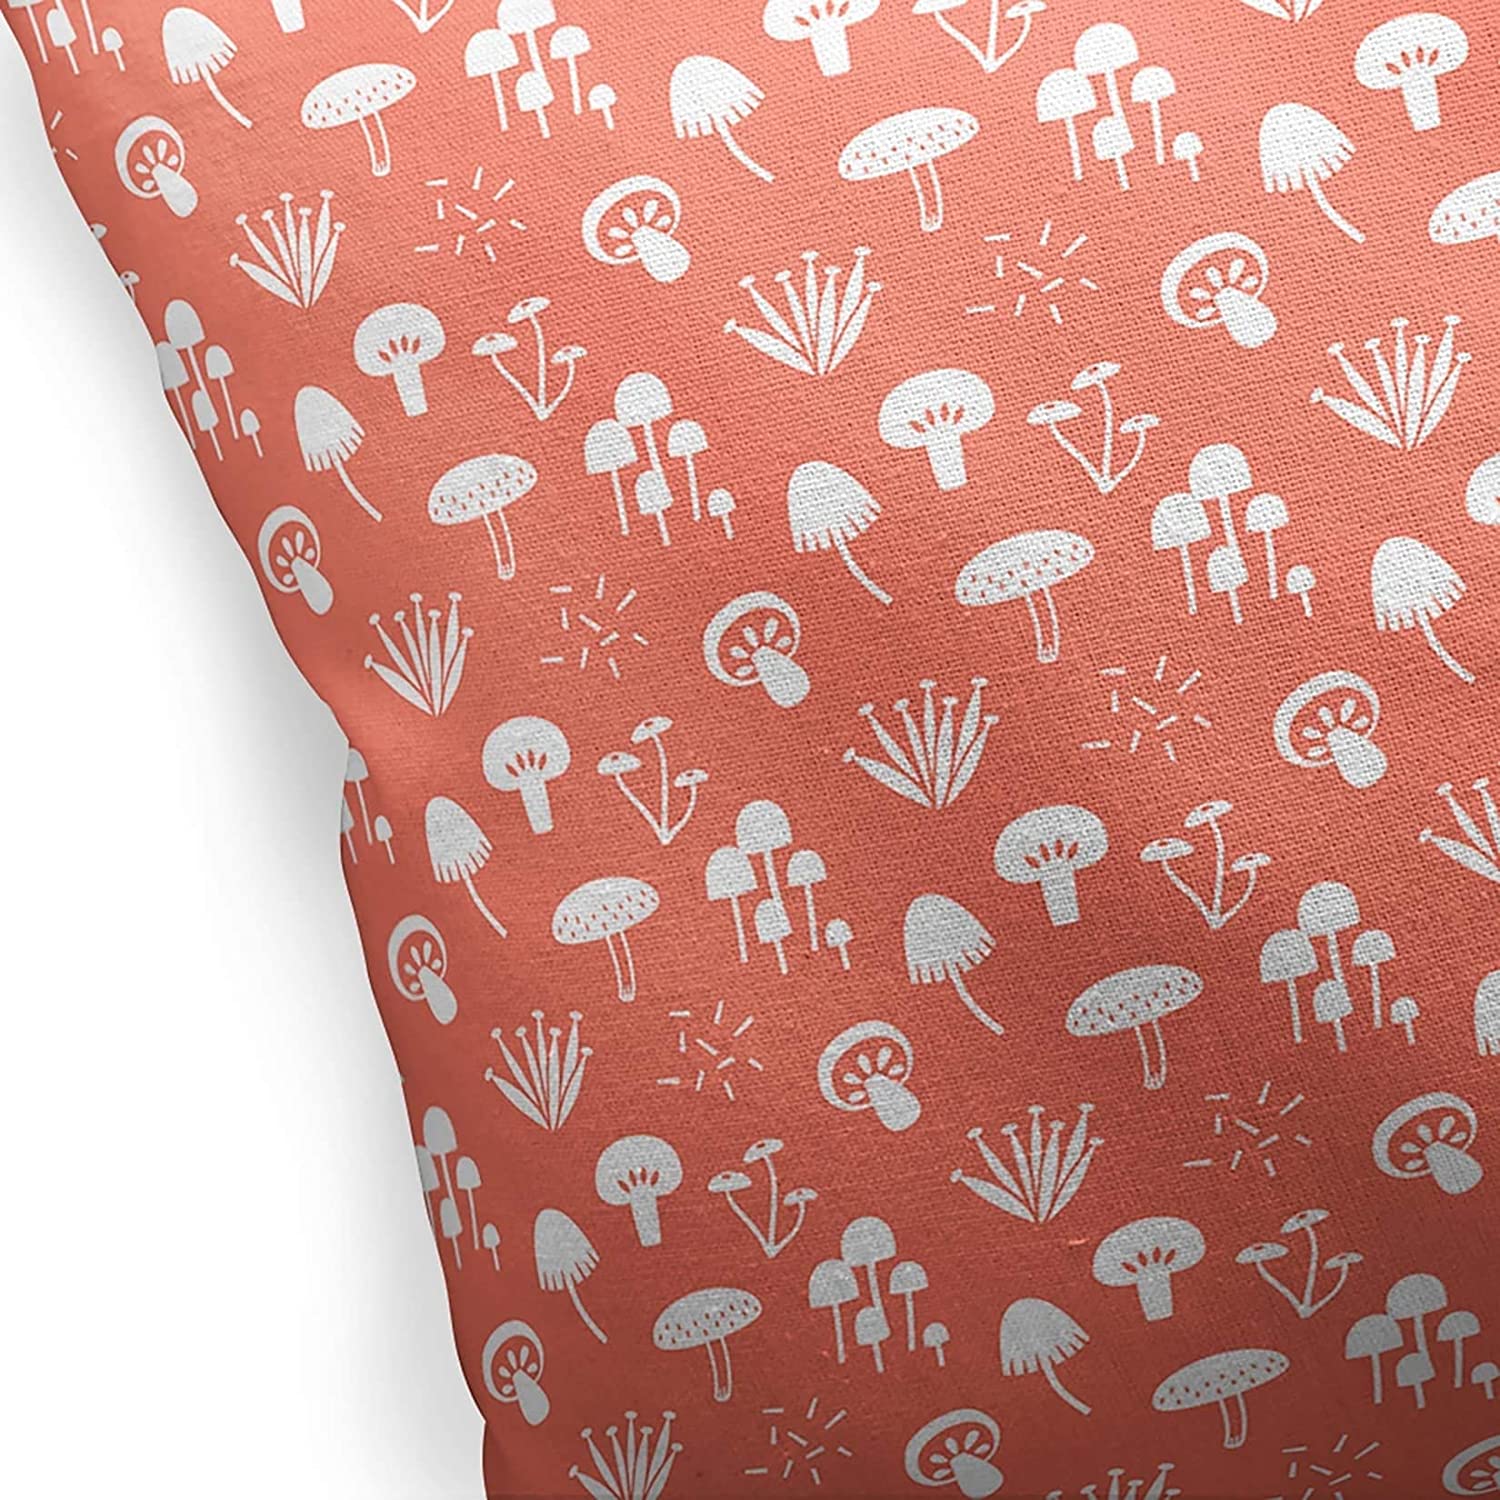 Mushroom Field Indoor|Outdoor Pillow by Chi Hey Lee 18x18 Orange Floral Modern Contemporary Polyester Removable Cover